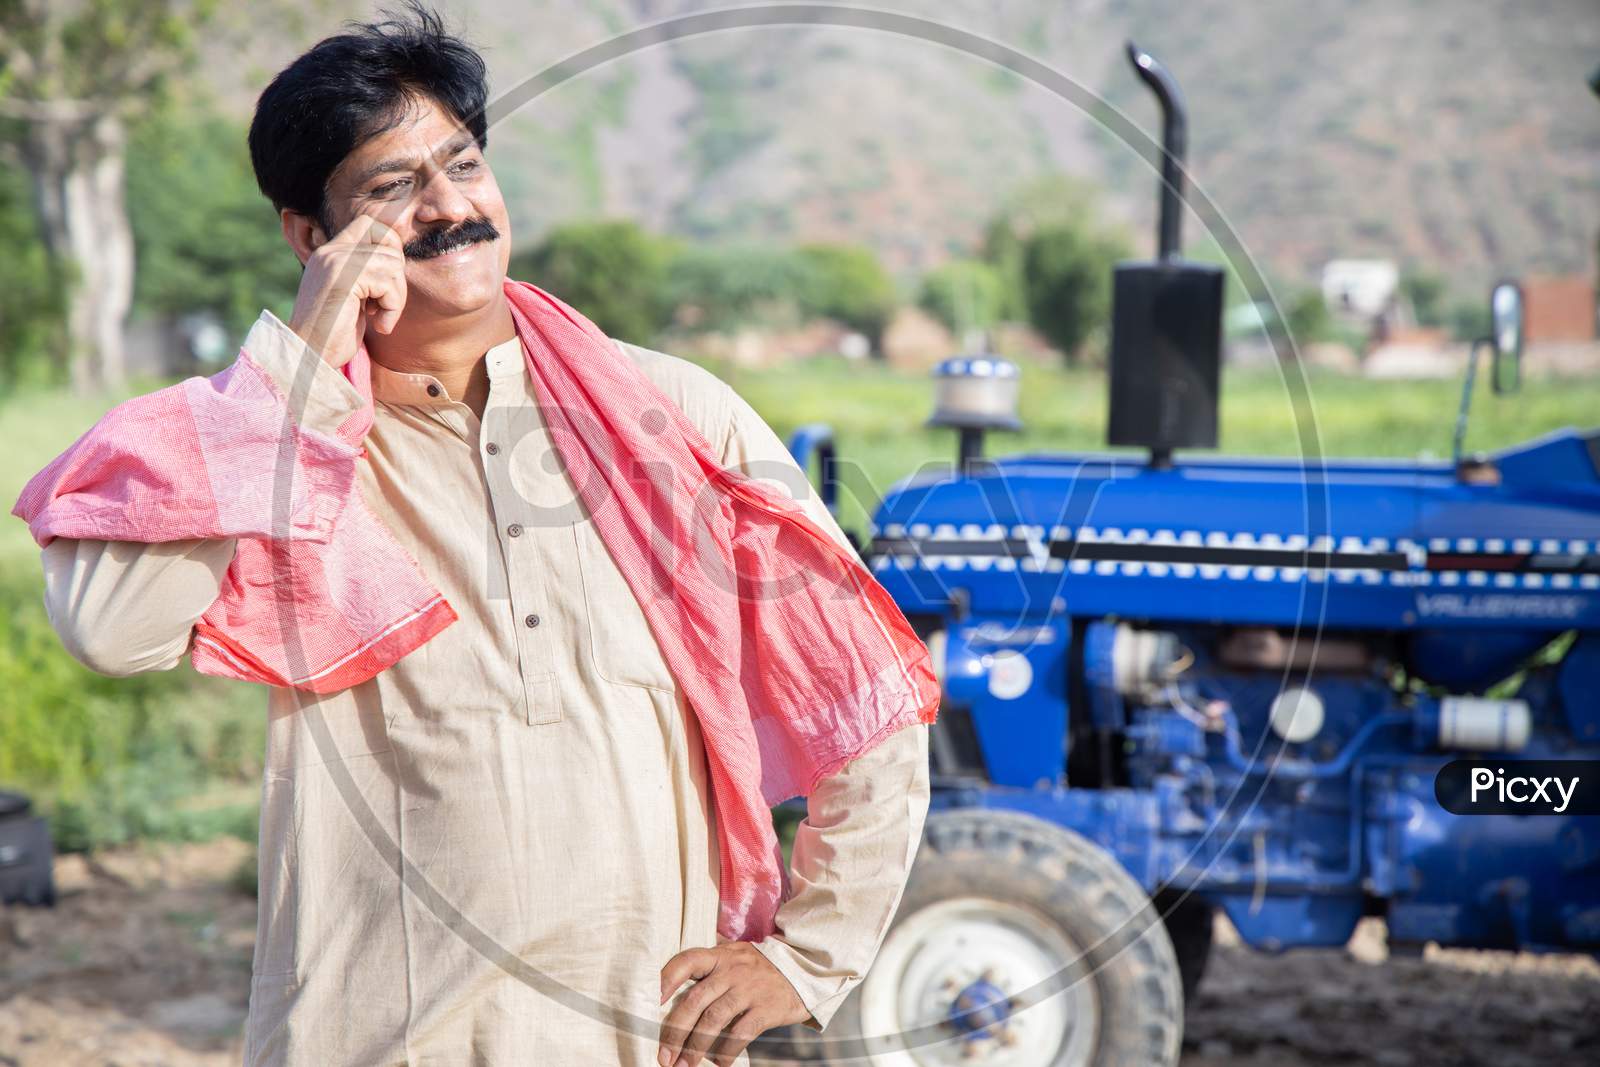 Young Happy Indian Farmer Touching His Mustache Standing At Agriculture Field With Blue Tractor Behind Him. Man Wearing Traditional Kurta Feel Proud. Rural India Concept.